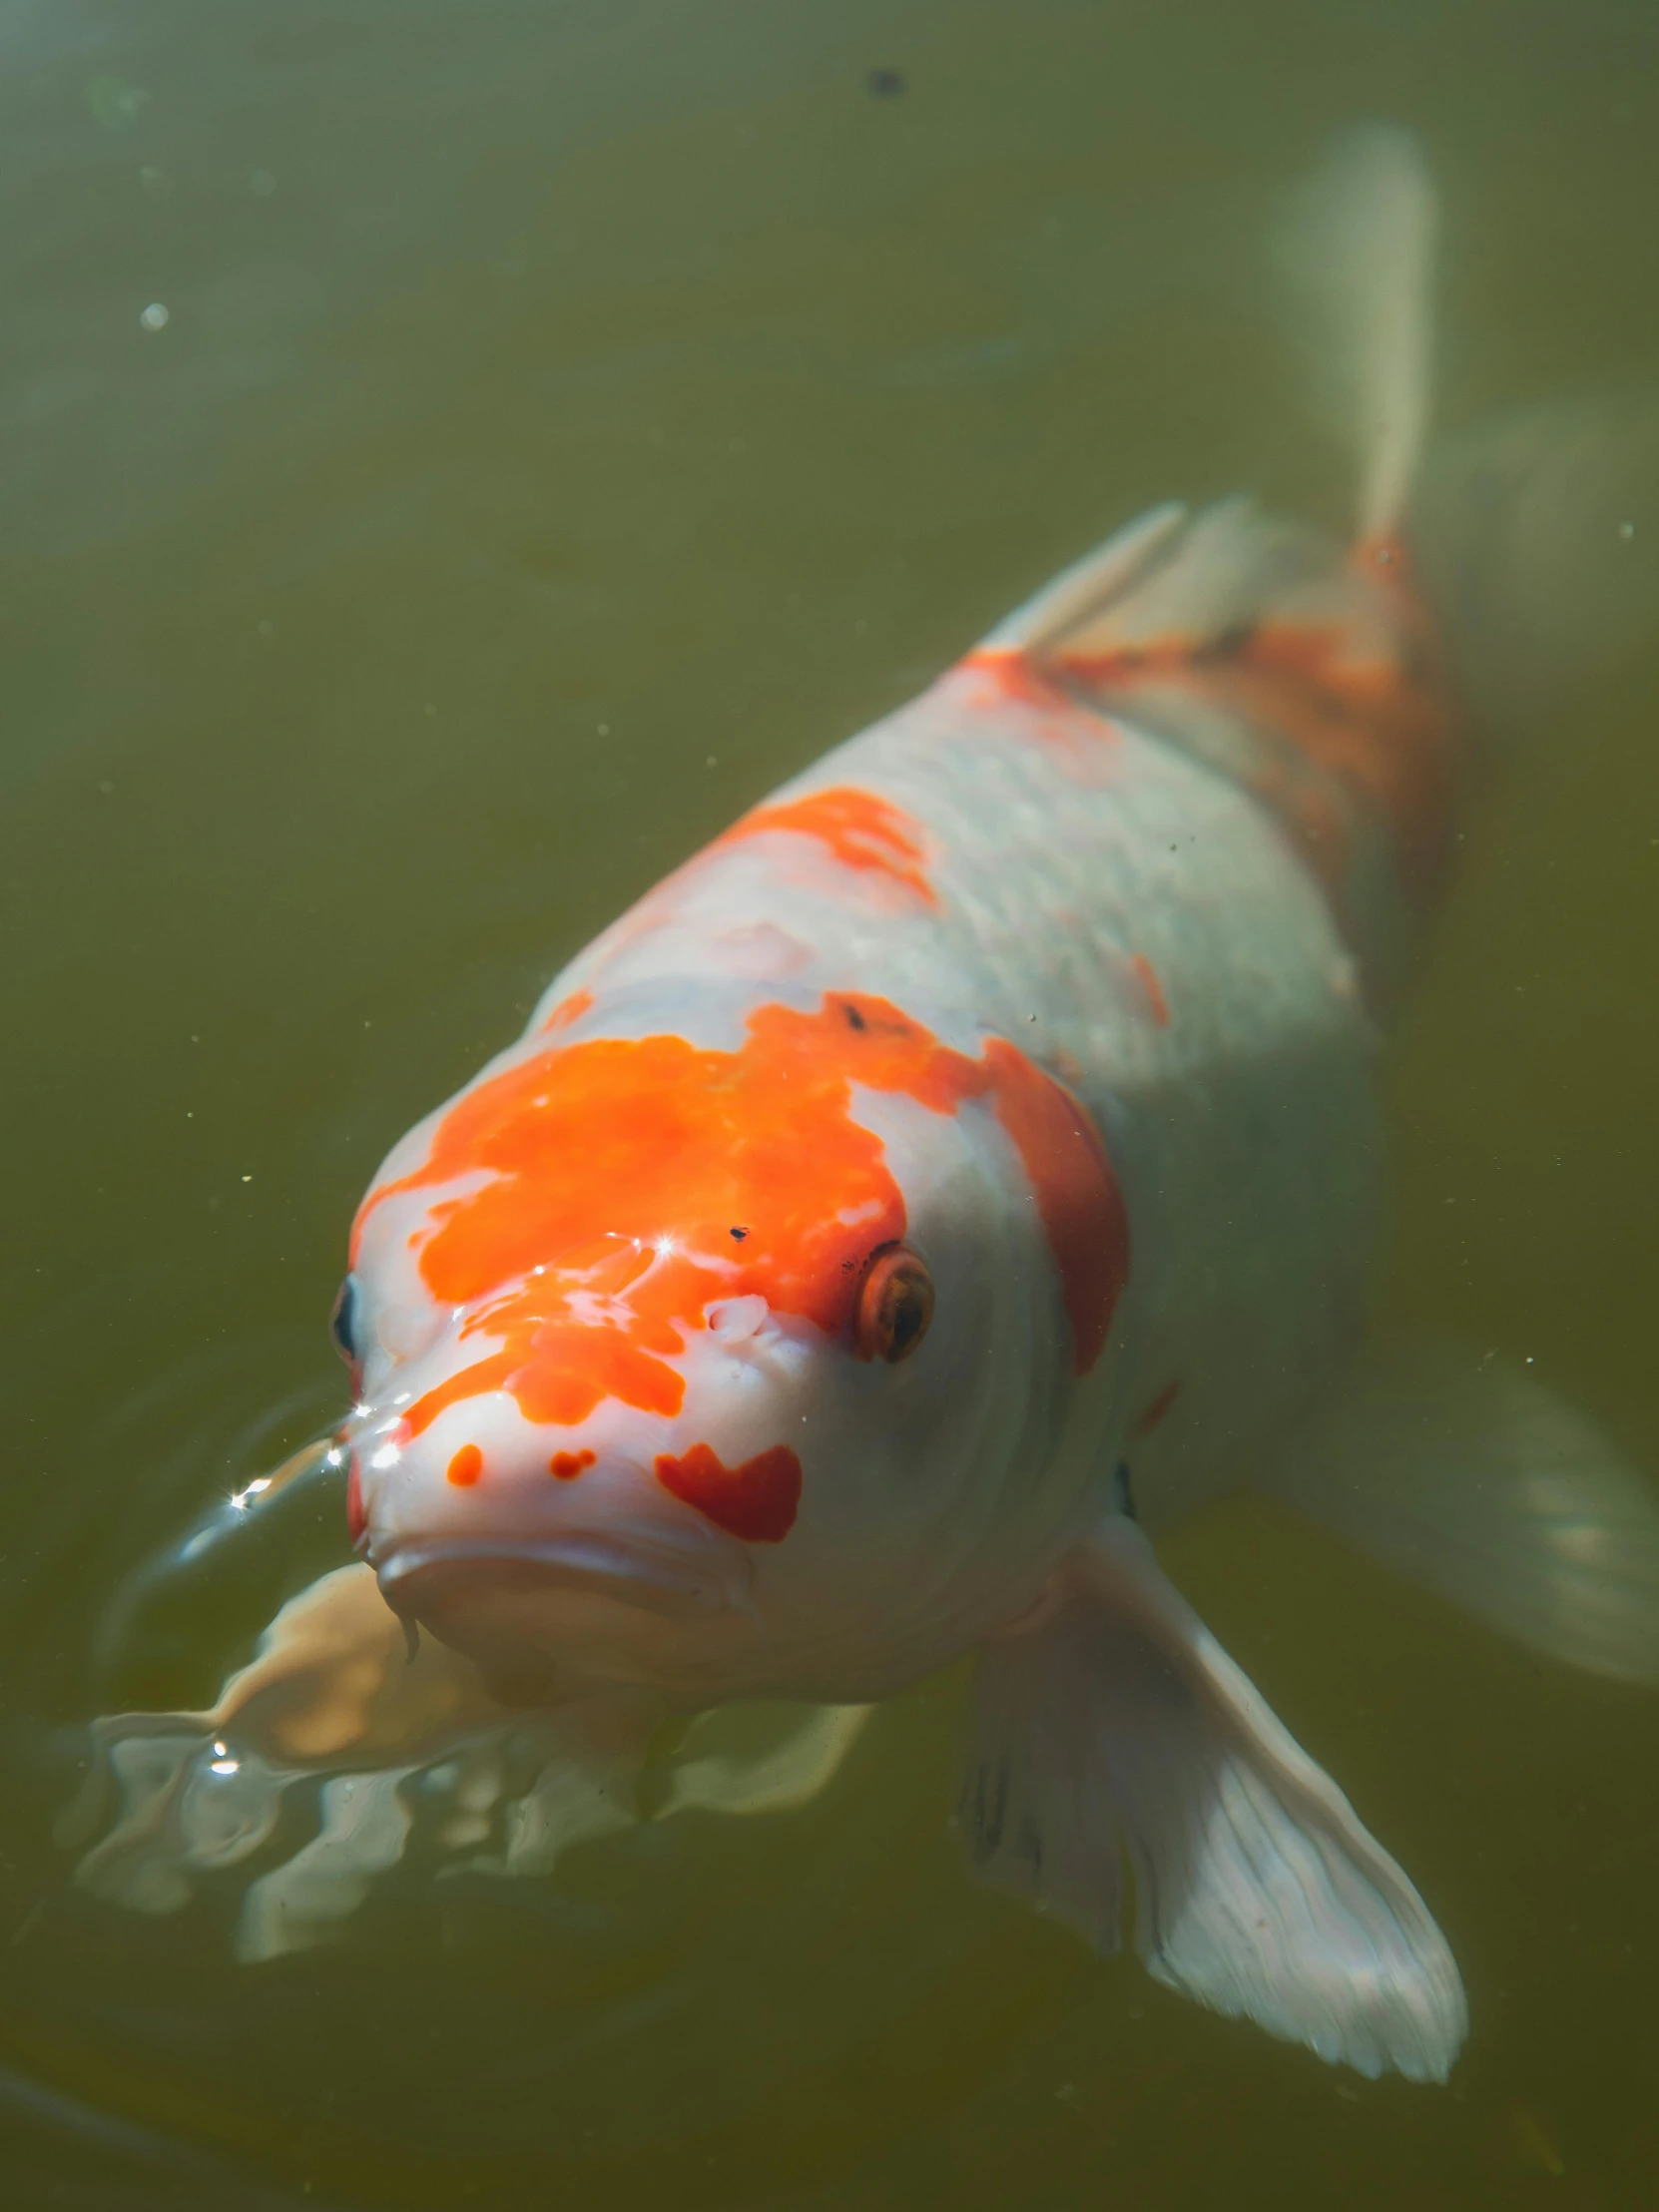 a close up of a fish in a body of water, orange and white, in a pond